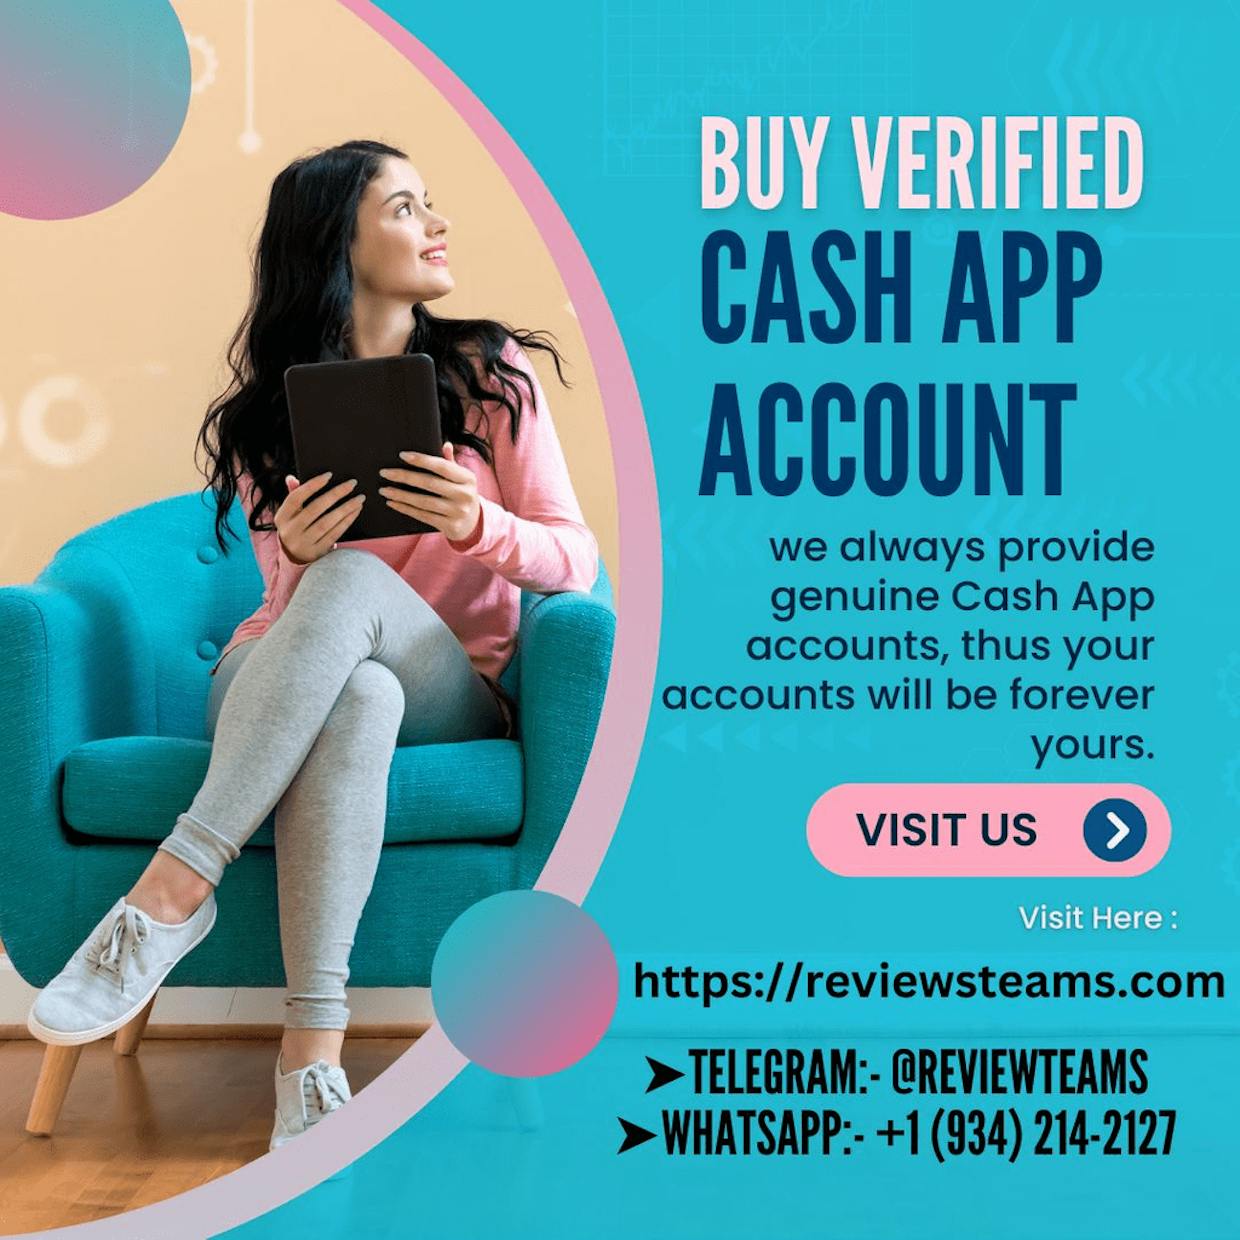 How To Buy A Verified Cash App Account?
